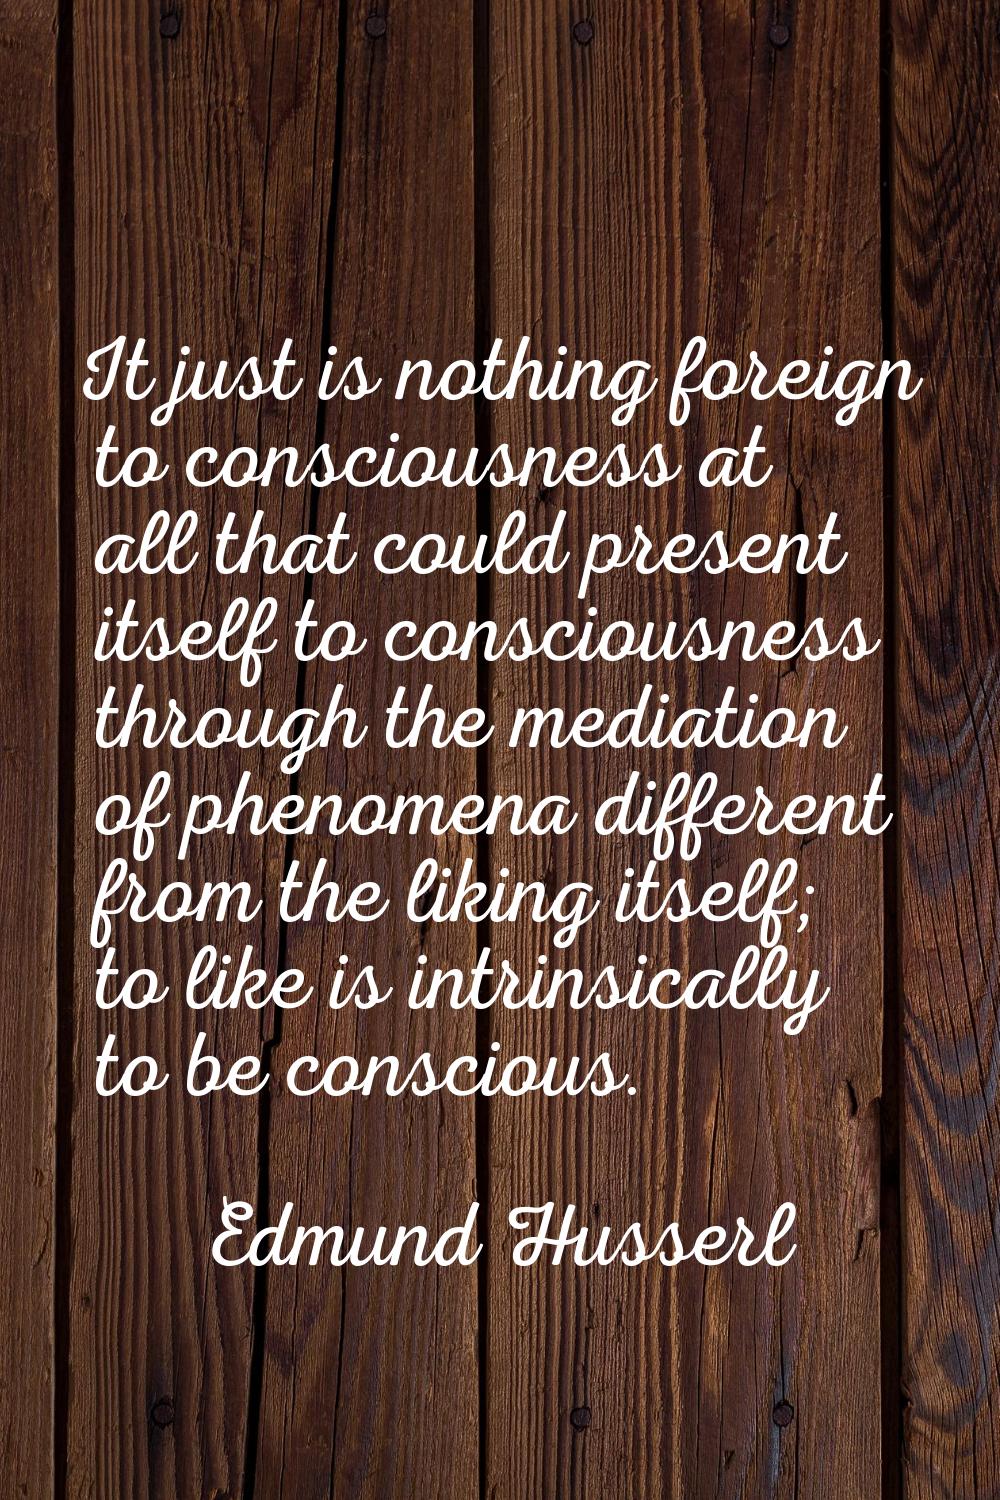 It just is nothing foreign to consciousness at all that could present itself to consciousness throu